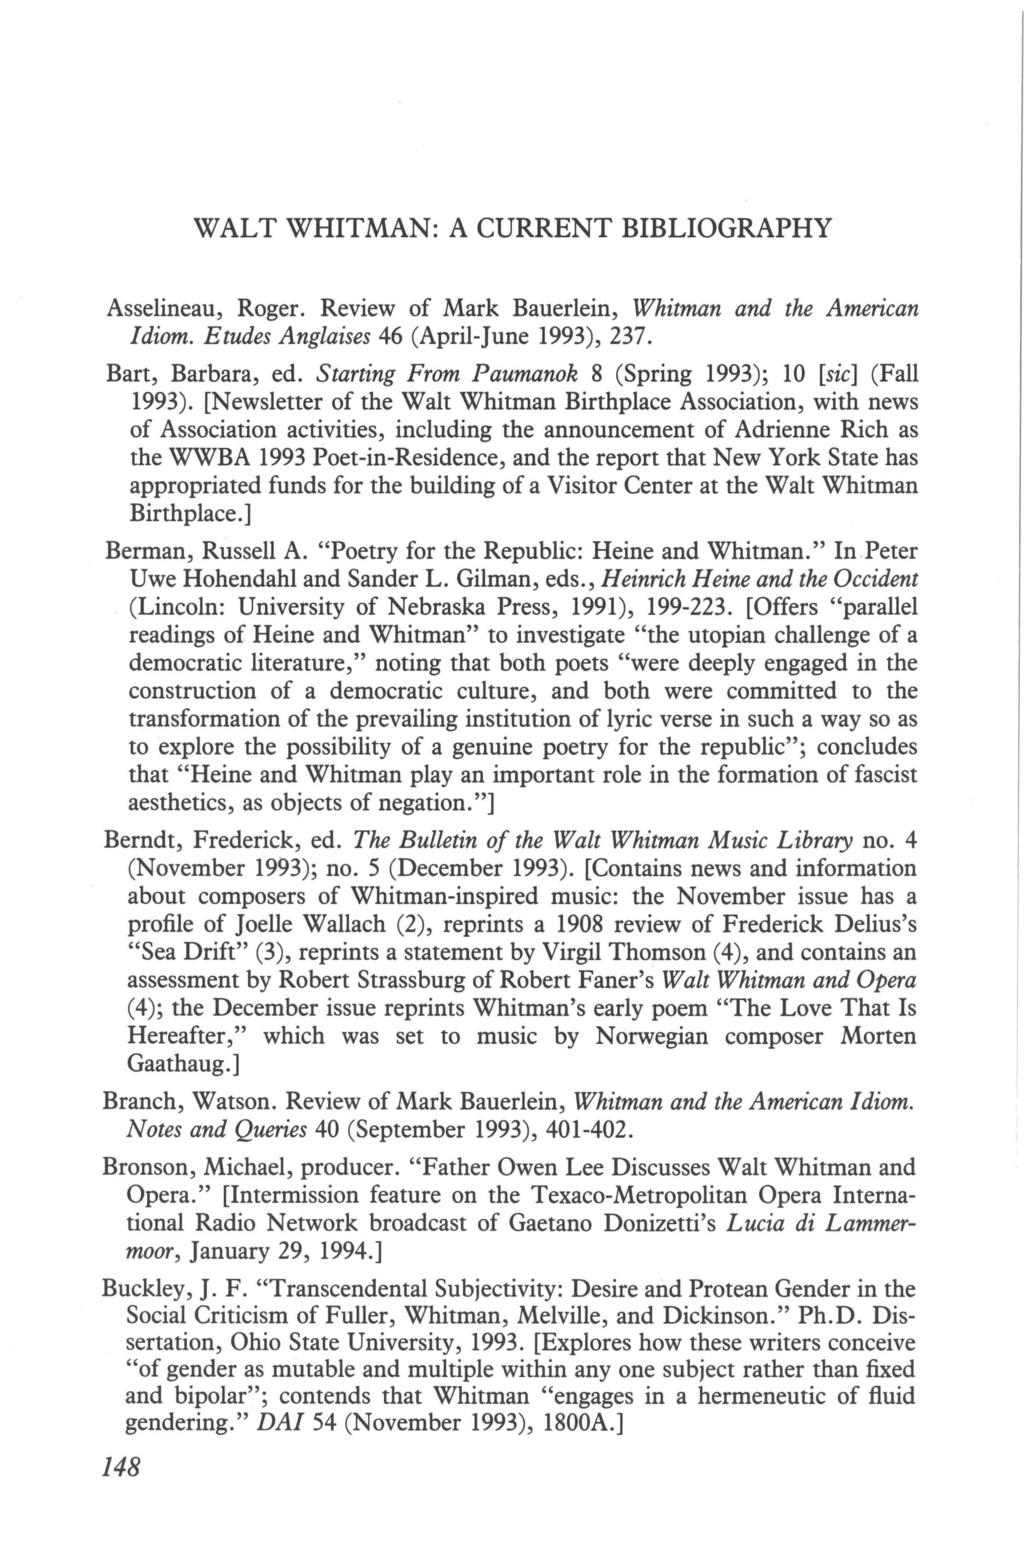 WALT WHITMAN: A CURRENT BIBLIOGRAPHY Asselineau, Roger. Review of Mark Bauerlein, Whitman and the American Idiom. Etudes Anglaises 46 (April-June 1993), 237. Bart, Barbara, ed.